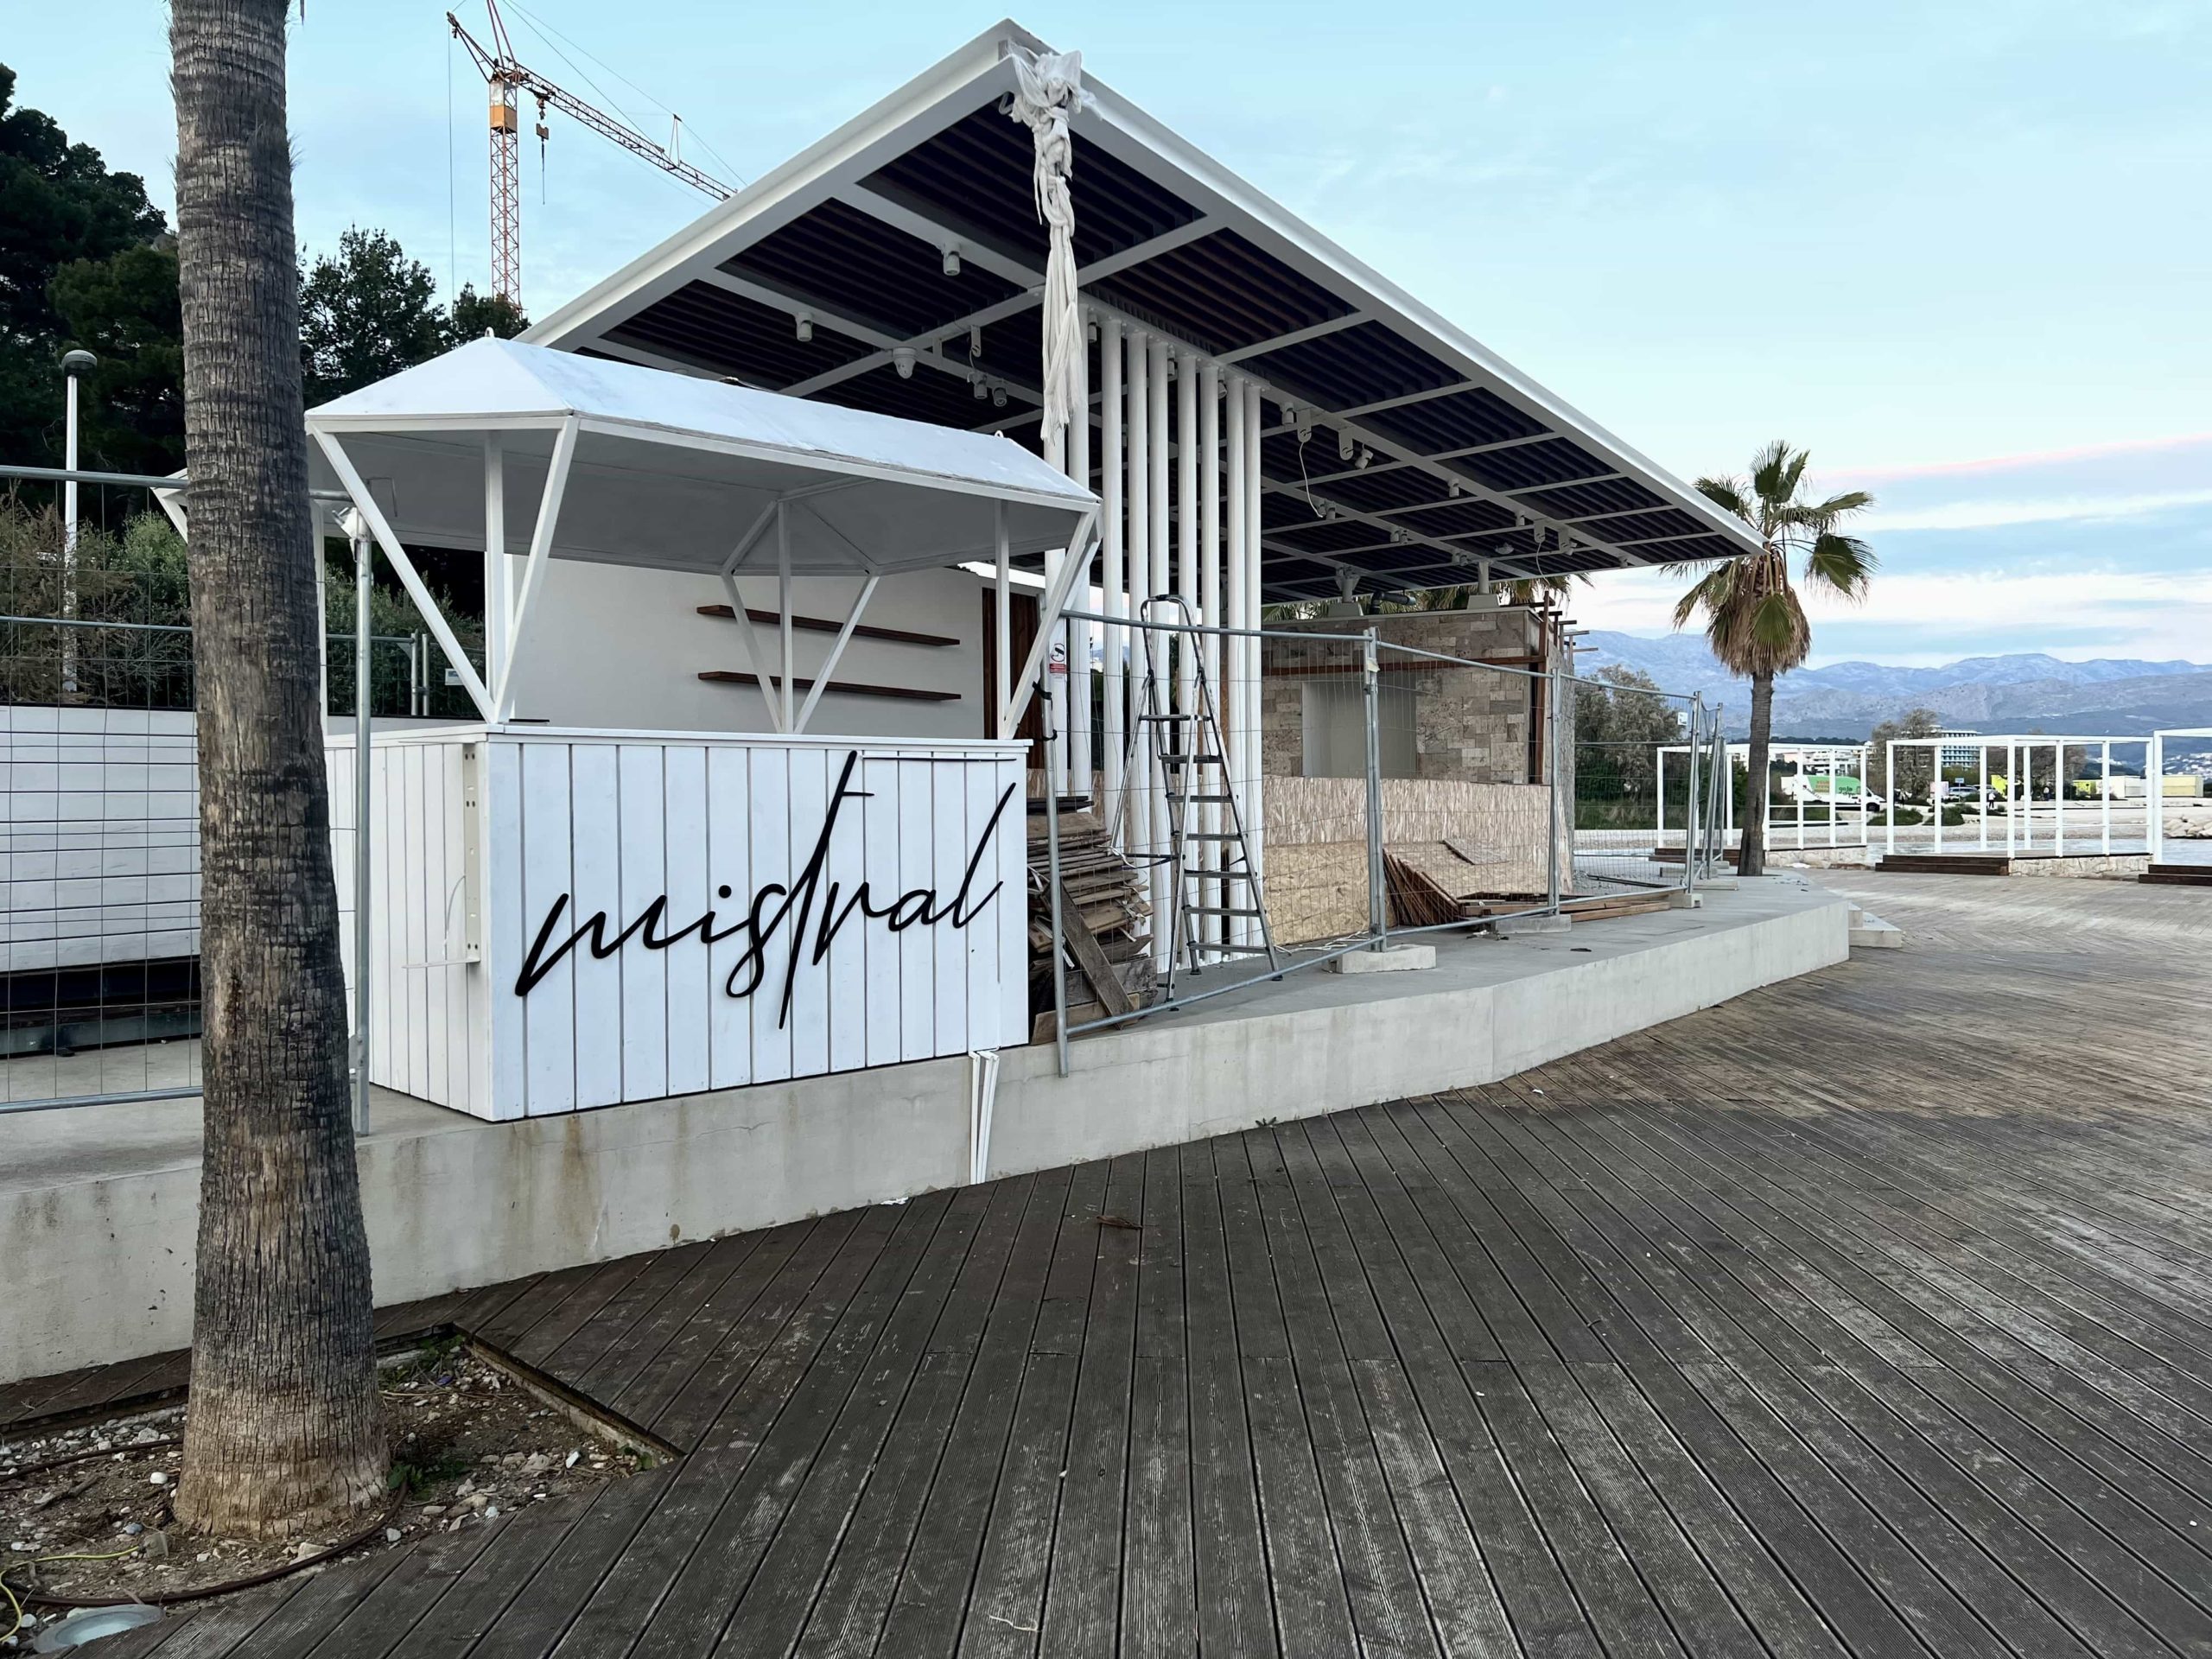 The Mistral Beach Club bar, fenced off and out of use during off-season